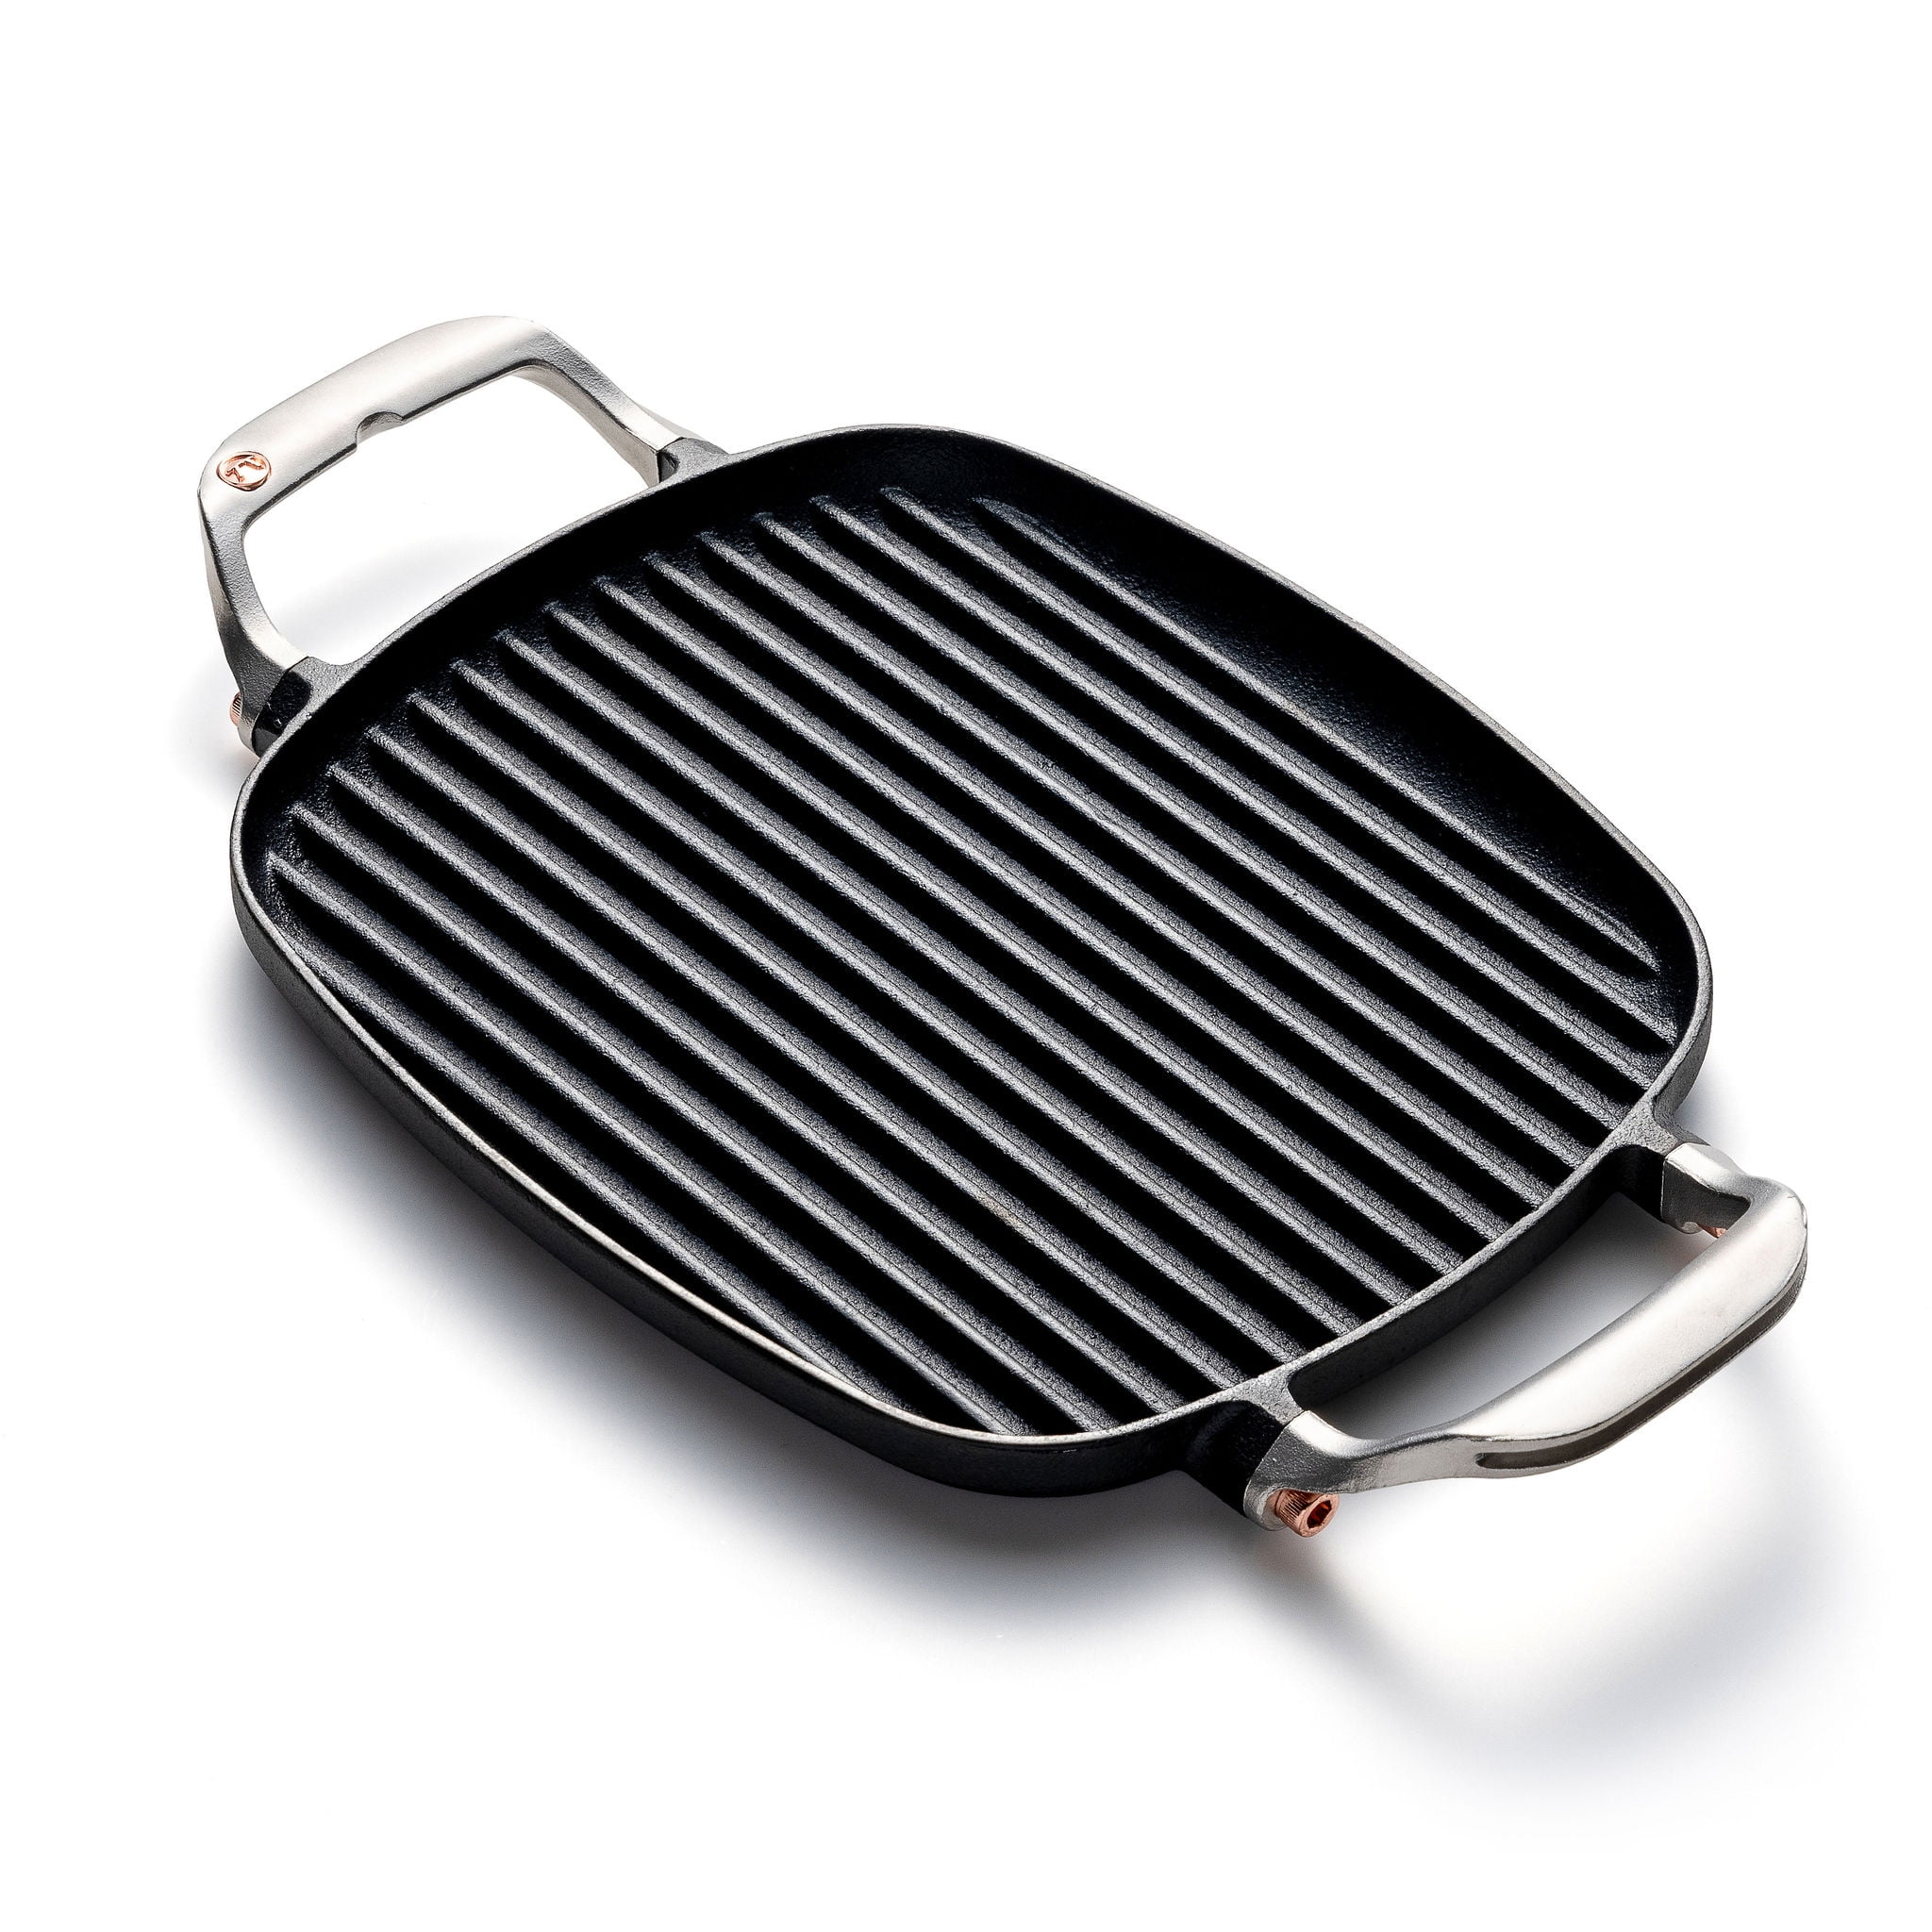 LAVA CAST IRON Lava Enameled Cast Iron Skillet 10 inch-3-Compartment Grill  Pan Self Handled Rectangle